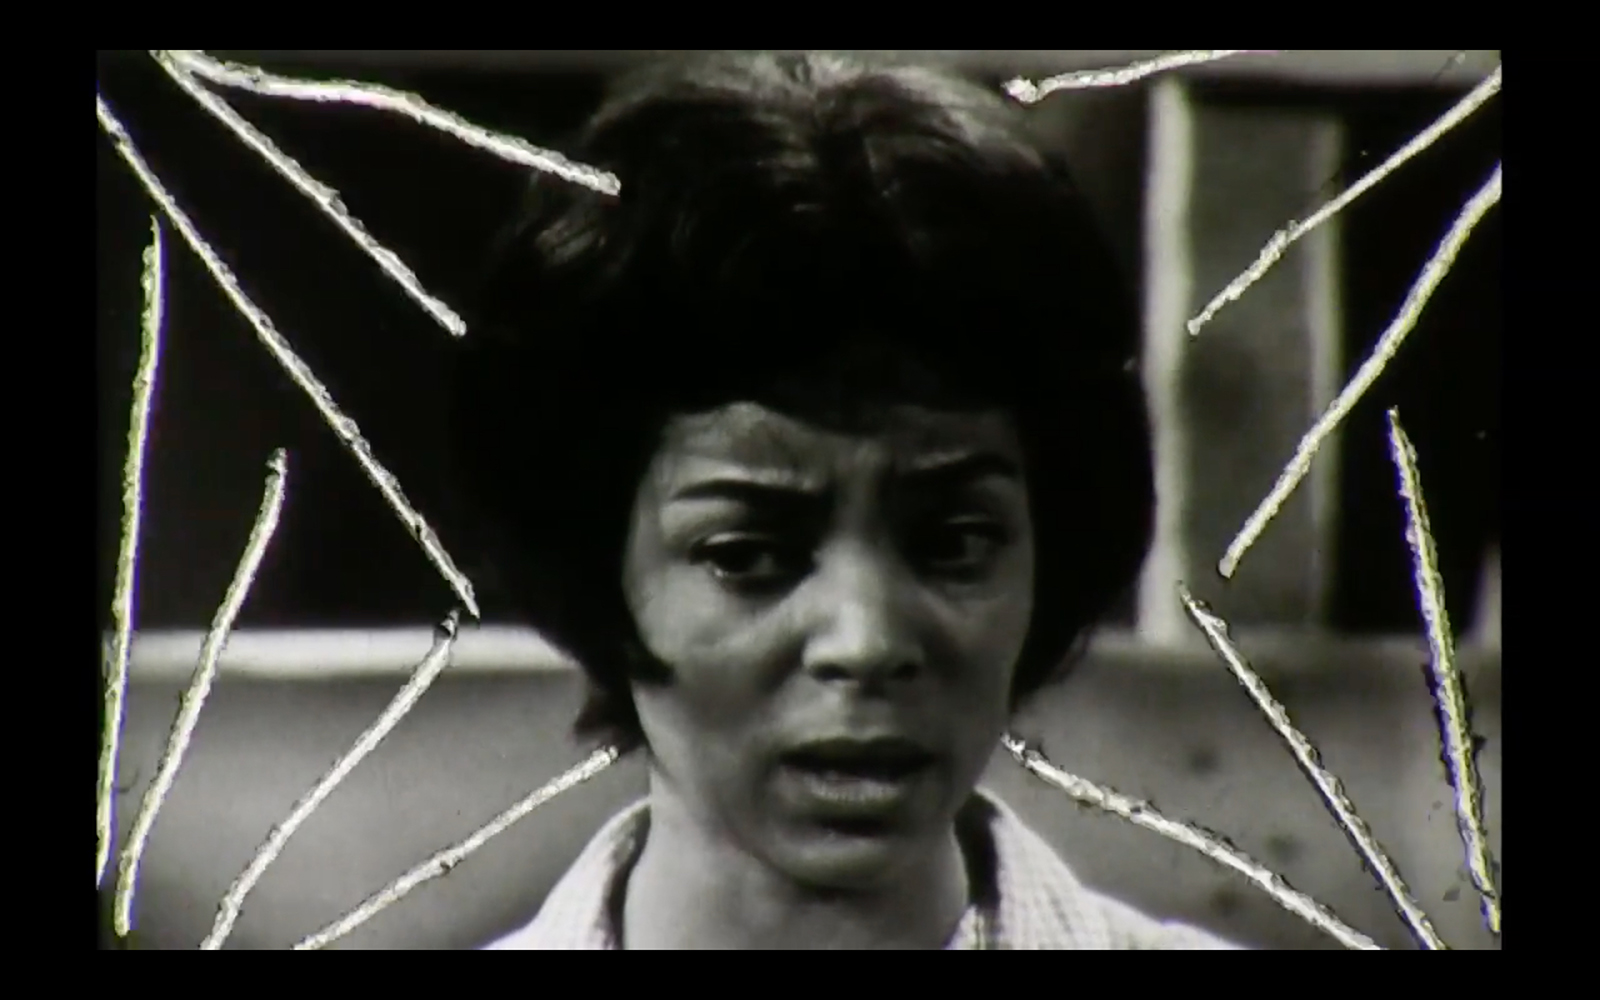 Film still with lines drawn from corners to central figure of a Black woman with a worried facial expression